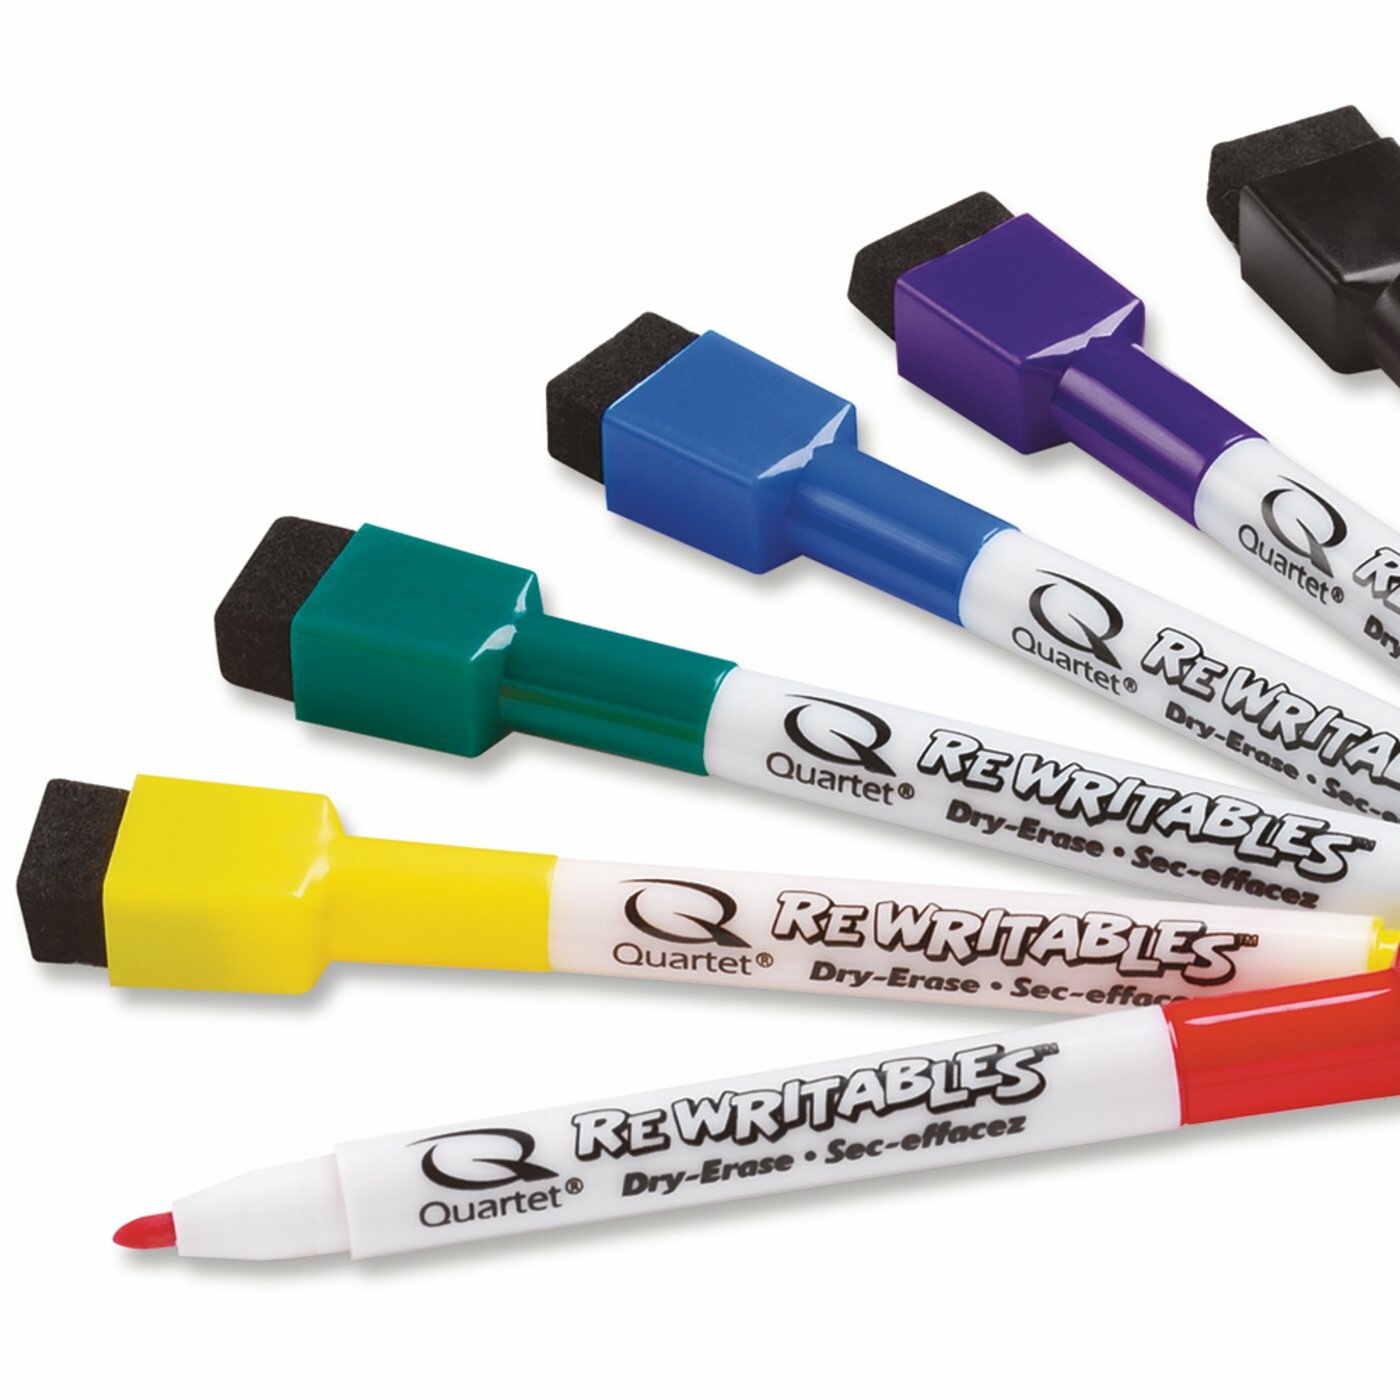 • Rexel Mini Re-Writable are cap mounted dry-erase markers with a magnet an...